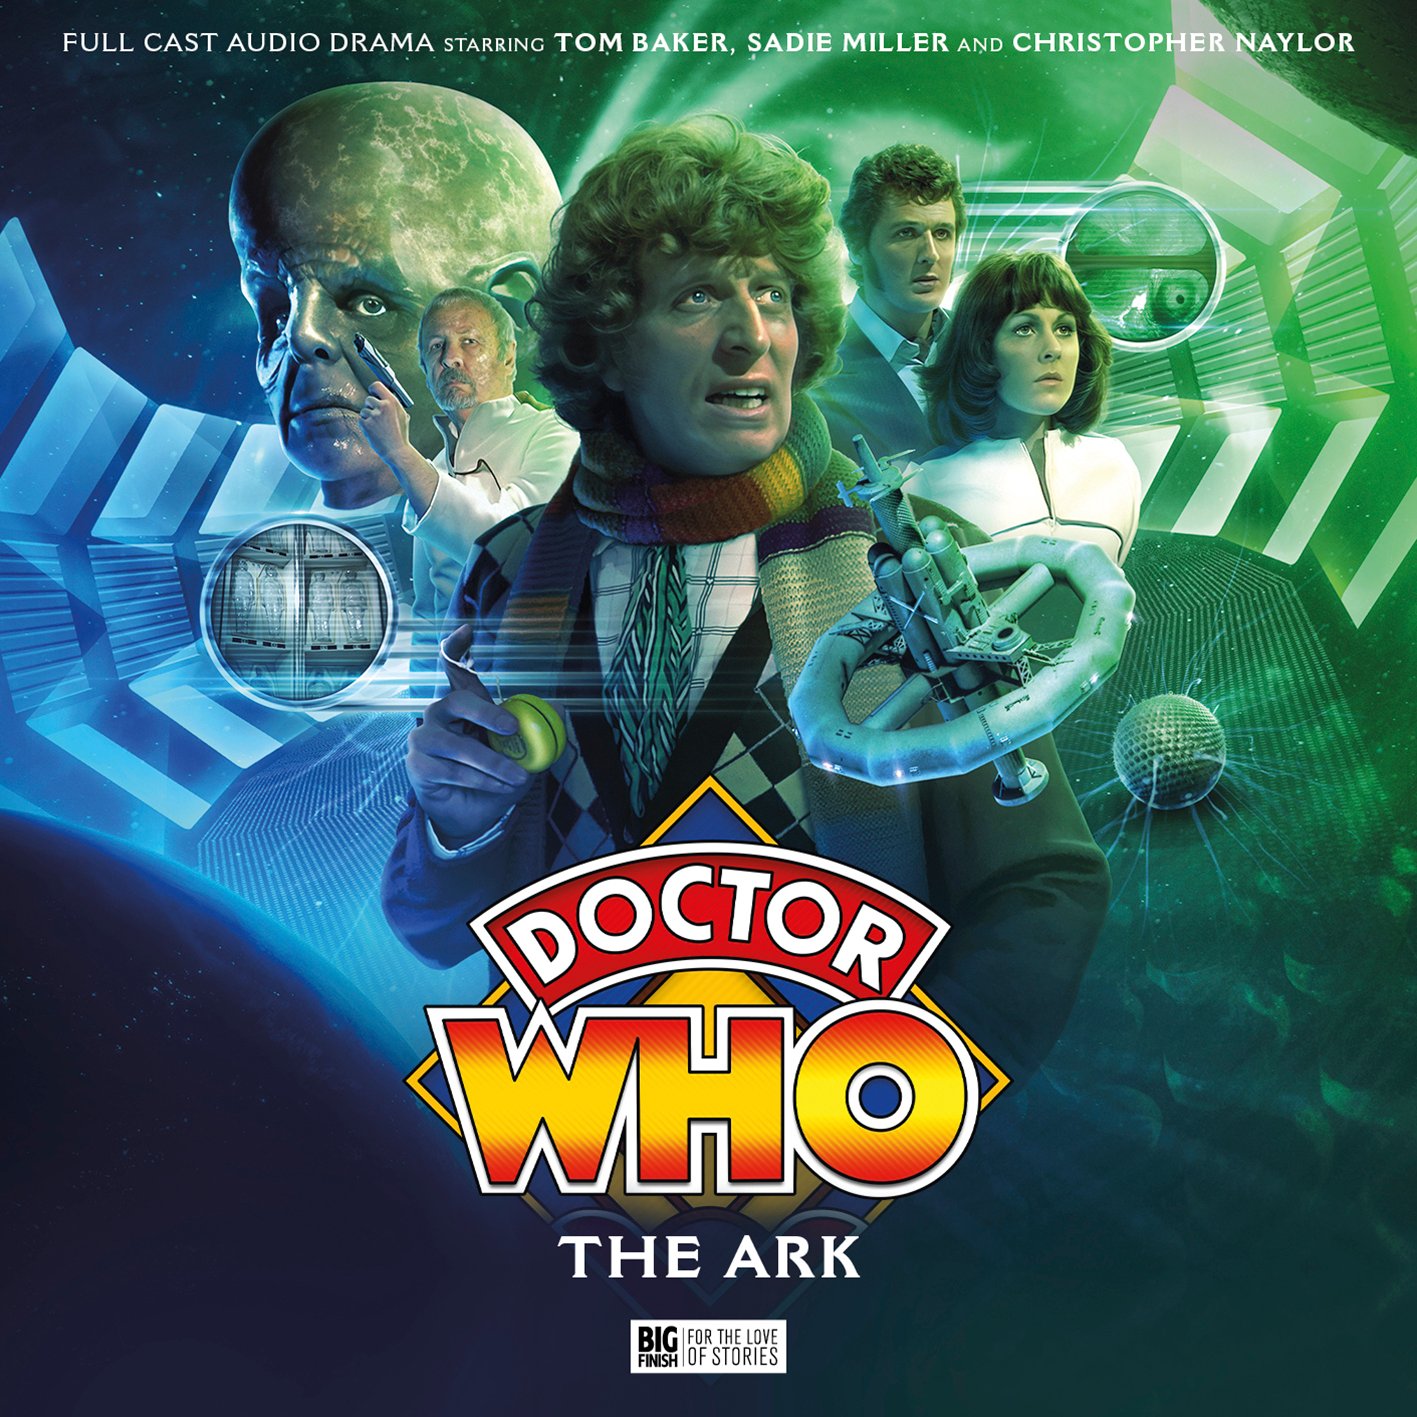 Reviewed: Big Finish’s Doctor Who Lost Stories – The Ark